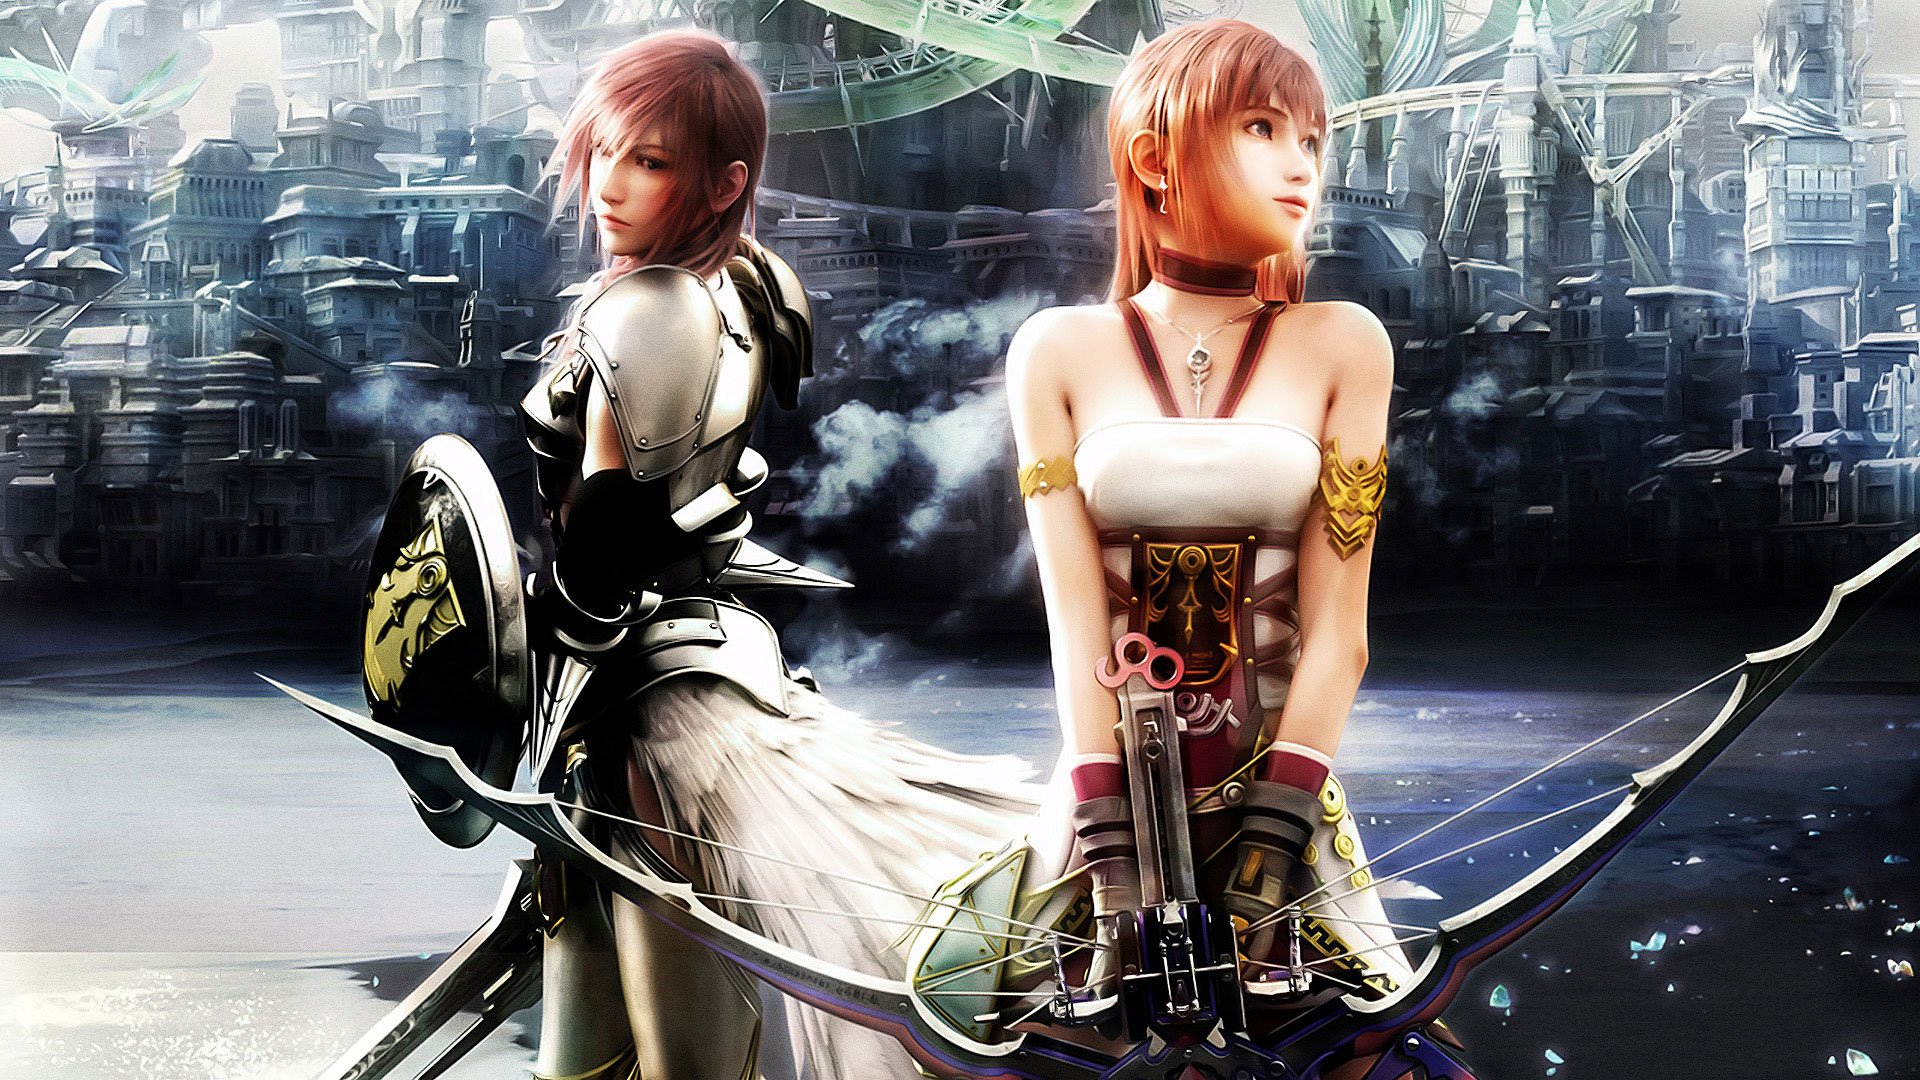 Final Fantasy XIII 2 Wallpapers in HD Page 2 1920x1080